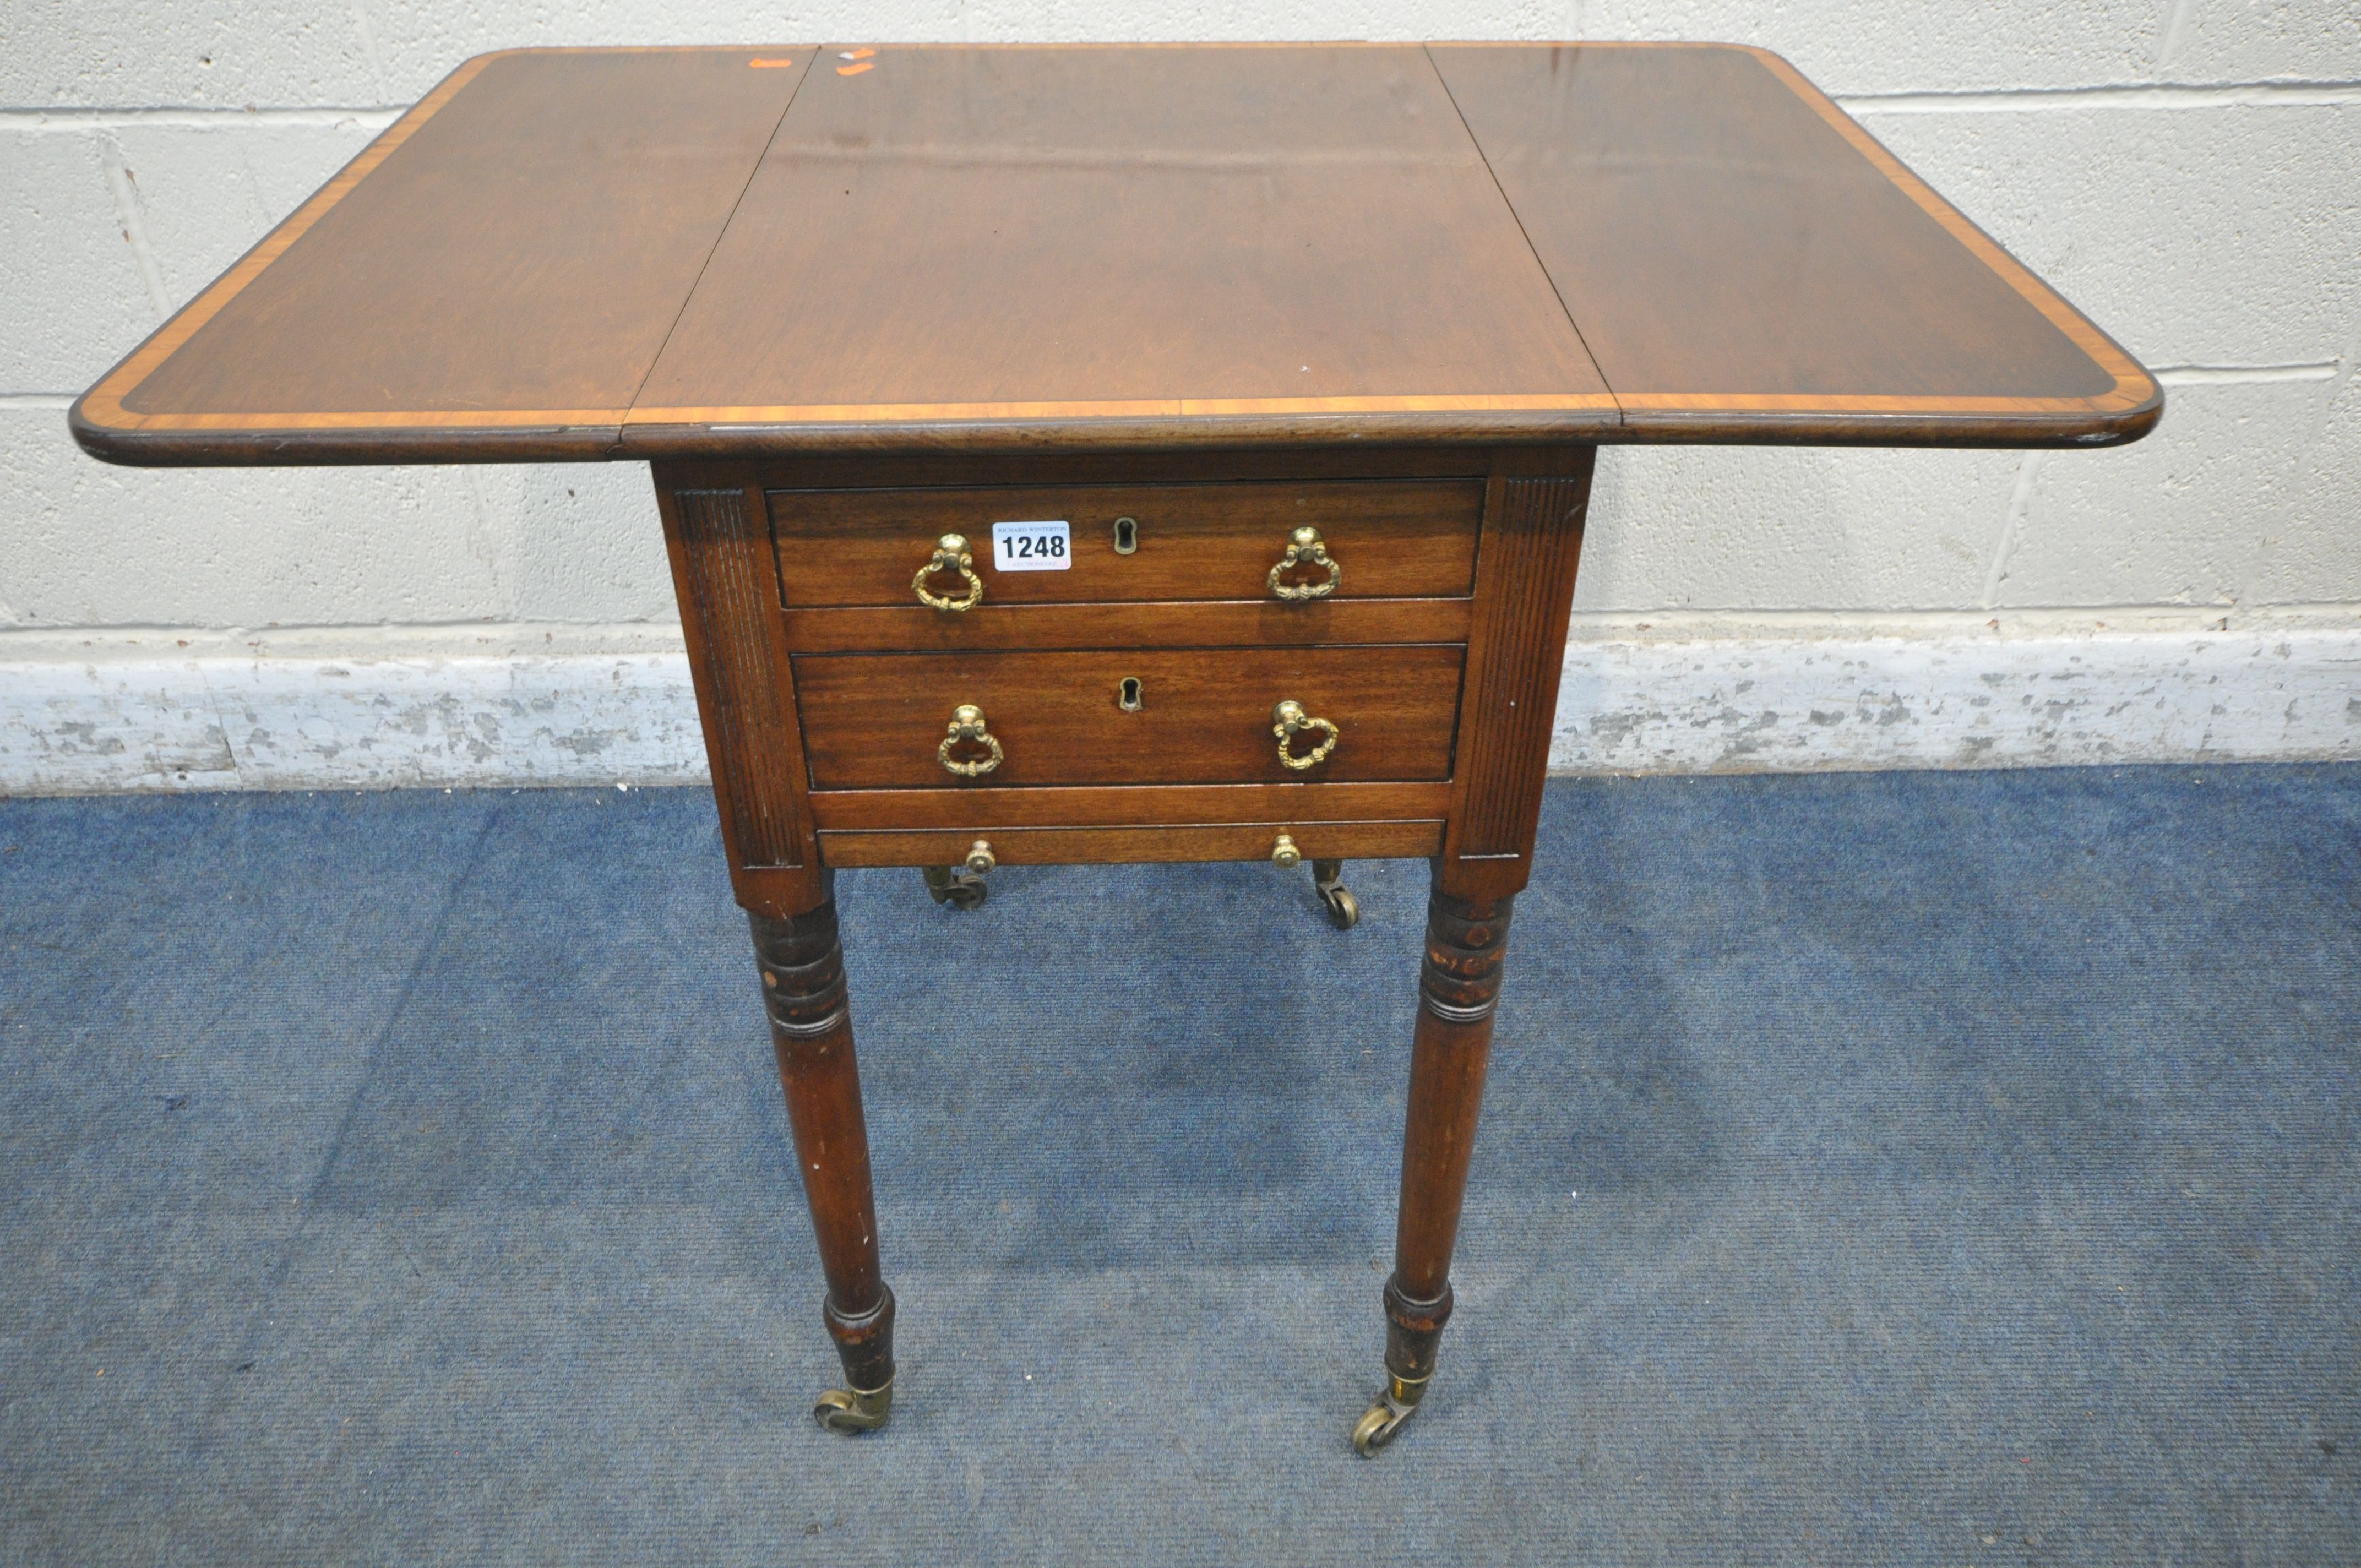 AN EDWARDIAN MAHOGANY AND CROSSBANDED DROP LEAF WORK TABLE, with two drawers, and slide, open - Image 2 of 3